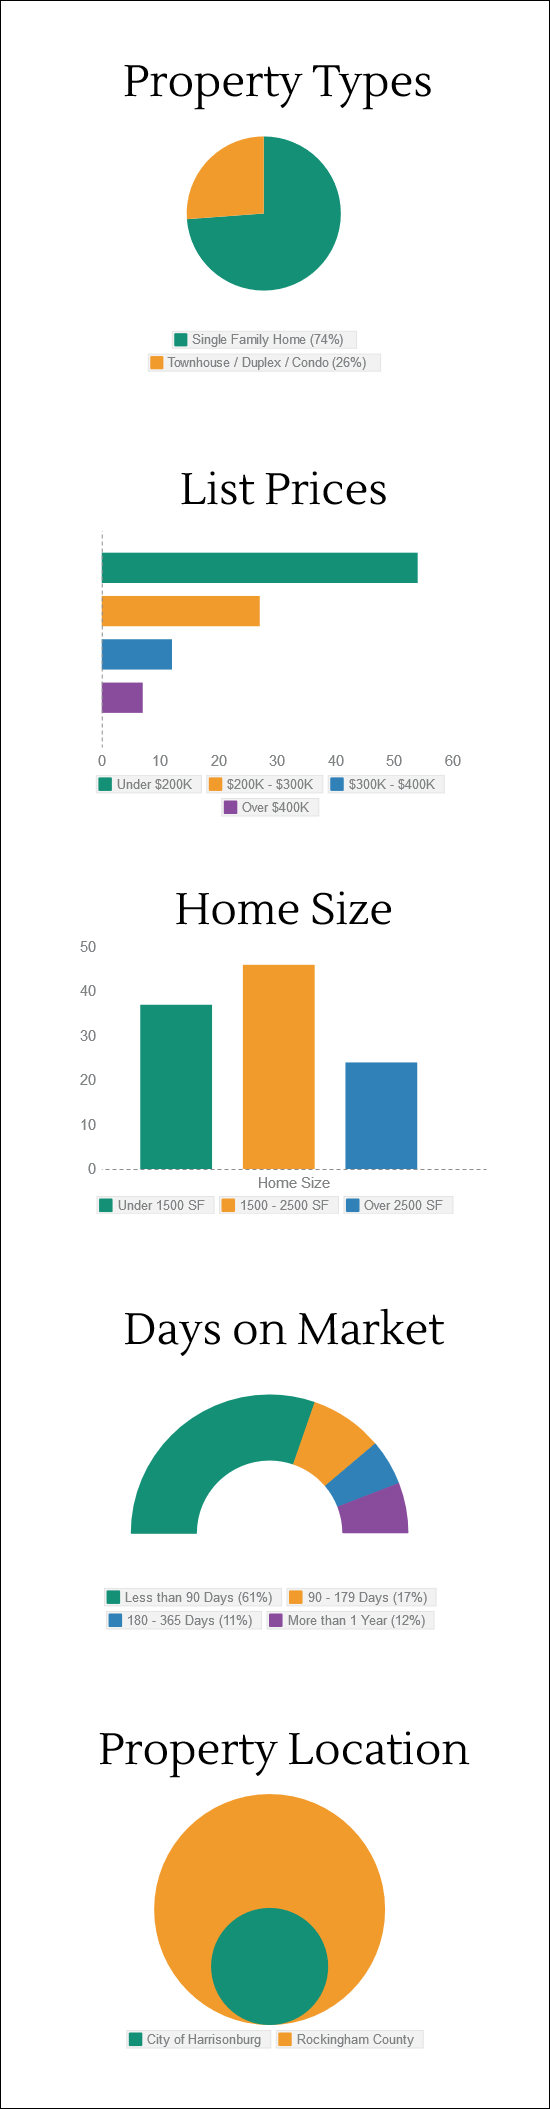 What did buyers buy in April 2015?